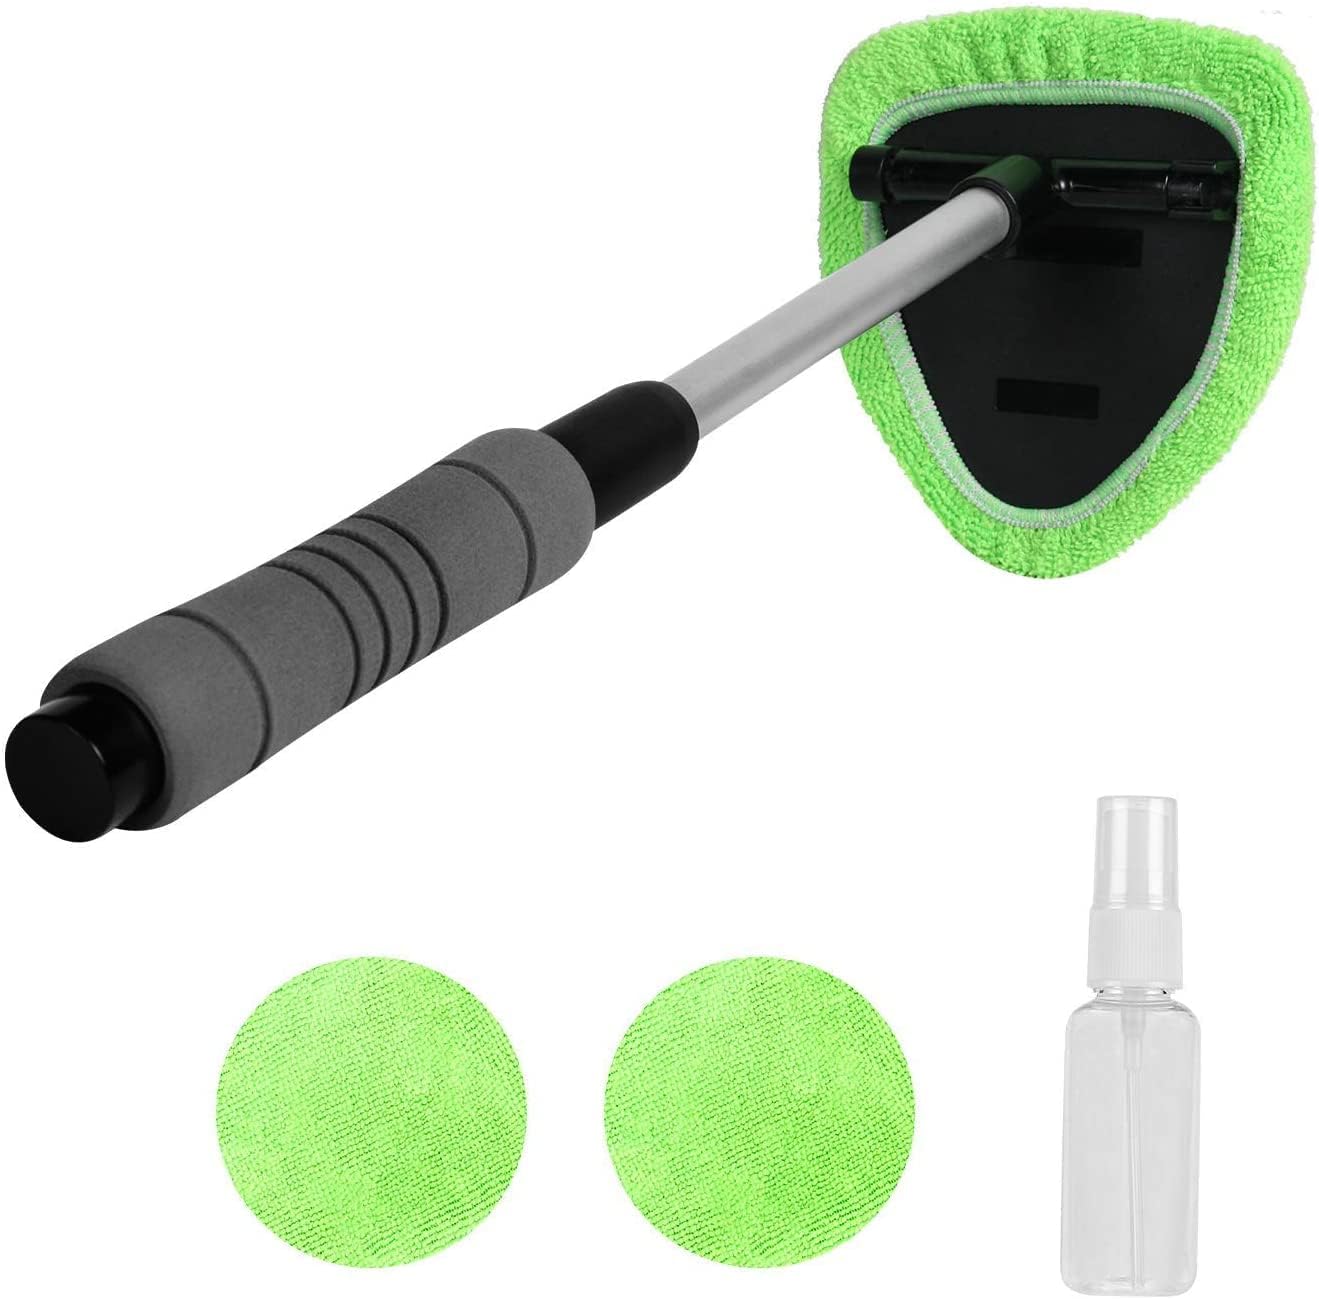 External Windshield Cleaner Inside Car Window Cleaner Windshield Cleaning Tool with Extendable Handle and Microfiber Pad Head Auto Interior Exterior G